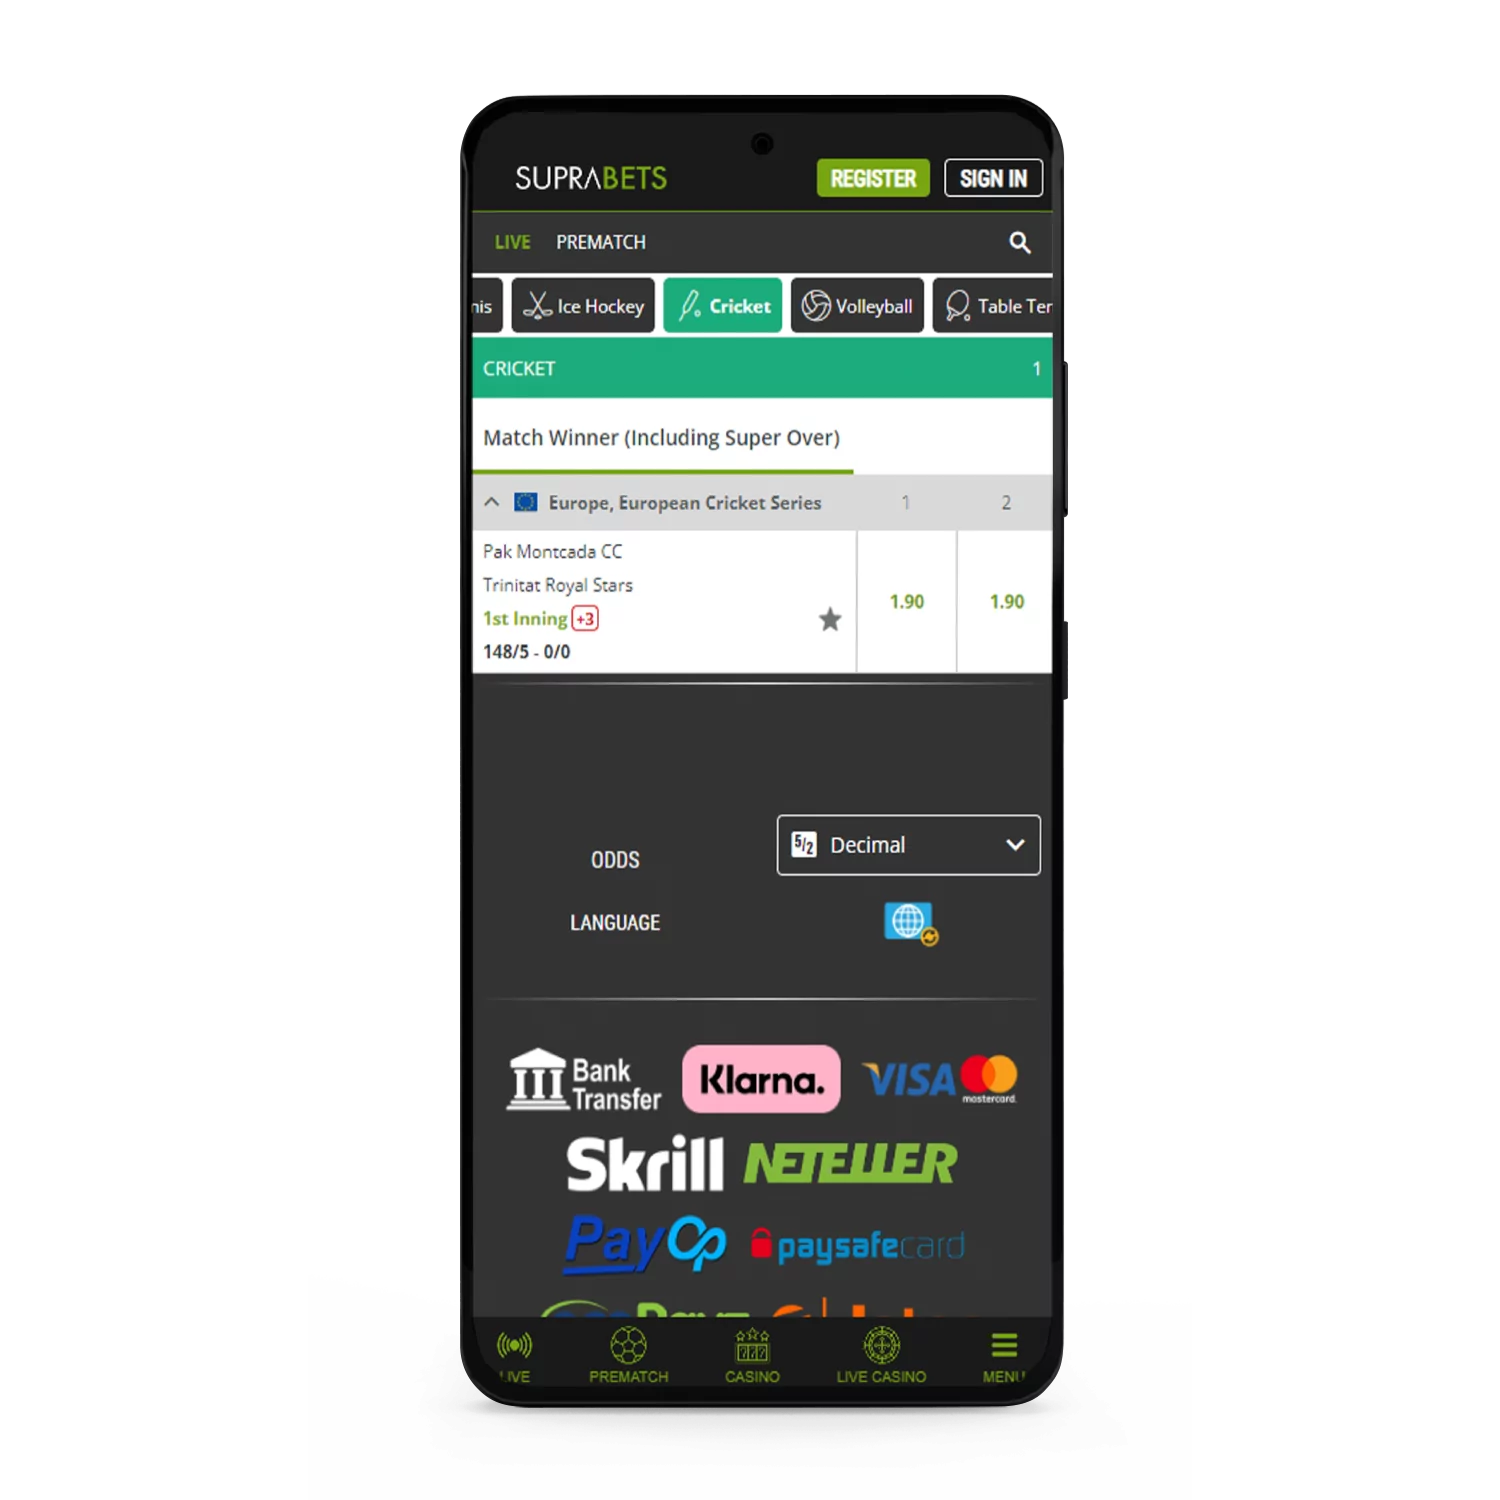 Learn how to place bets on cricket on the Suprabets website from a mobile device.